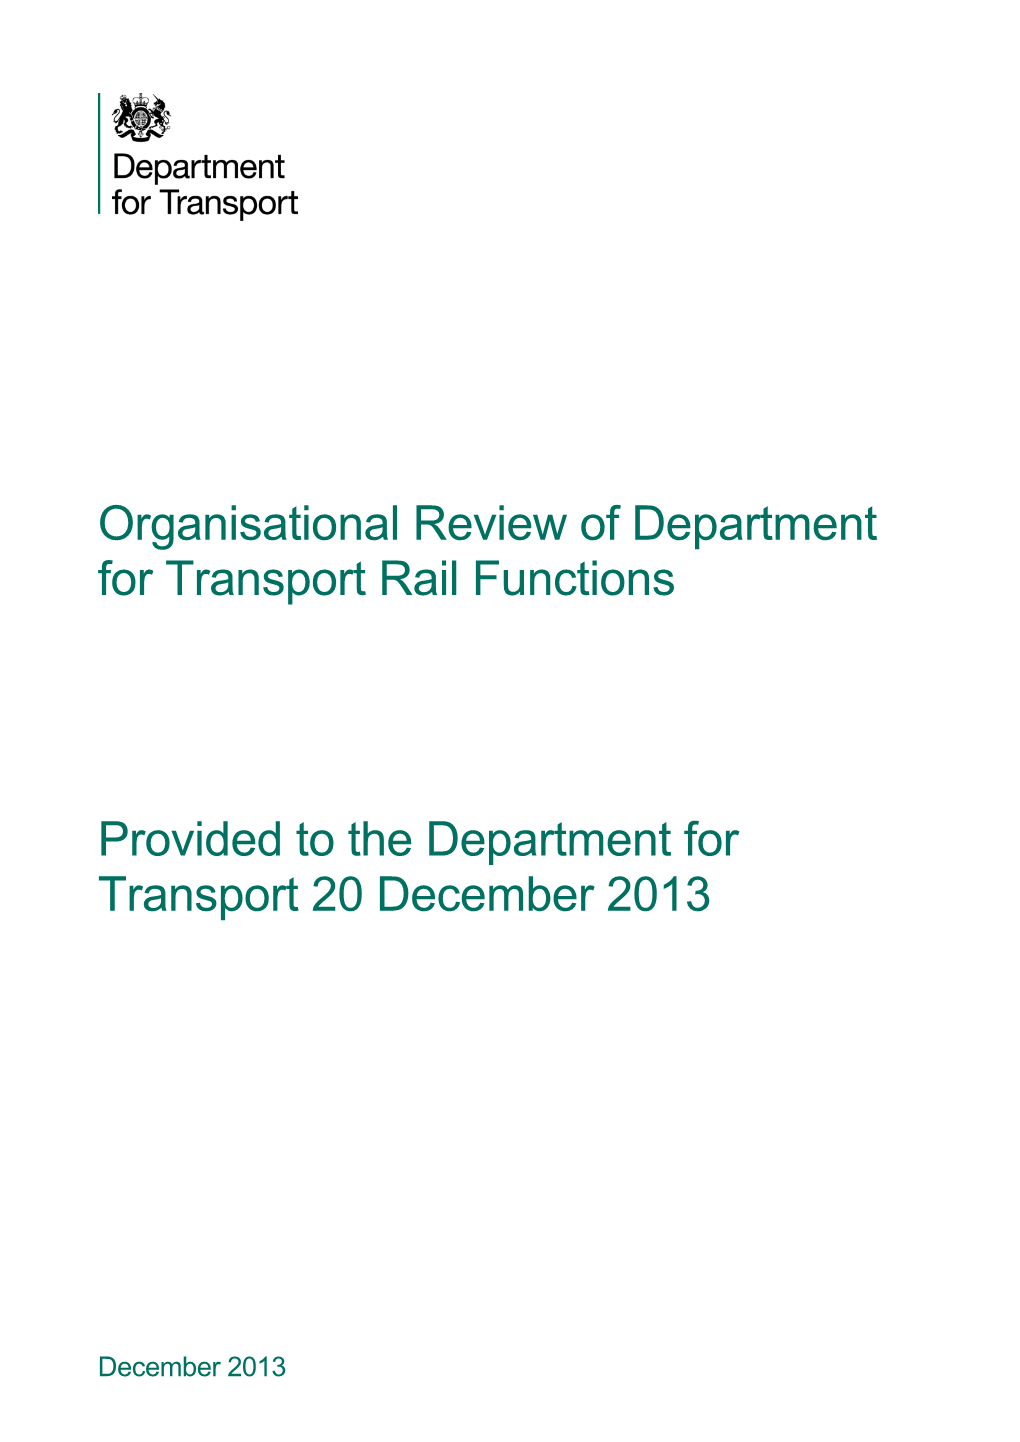 Organisational Review of Department for Transport Rail Functions